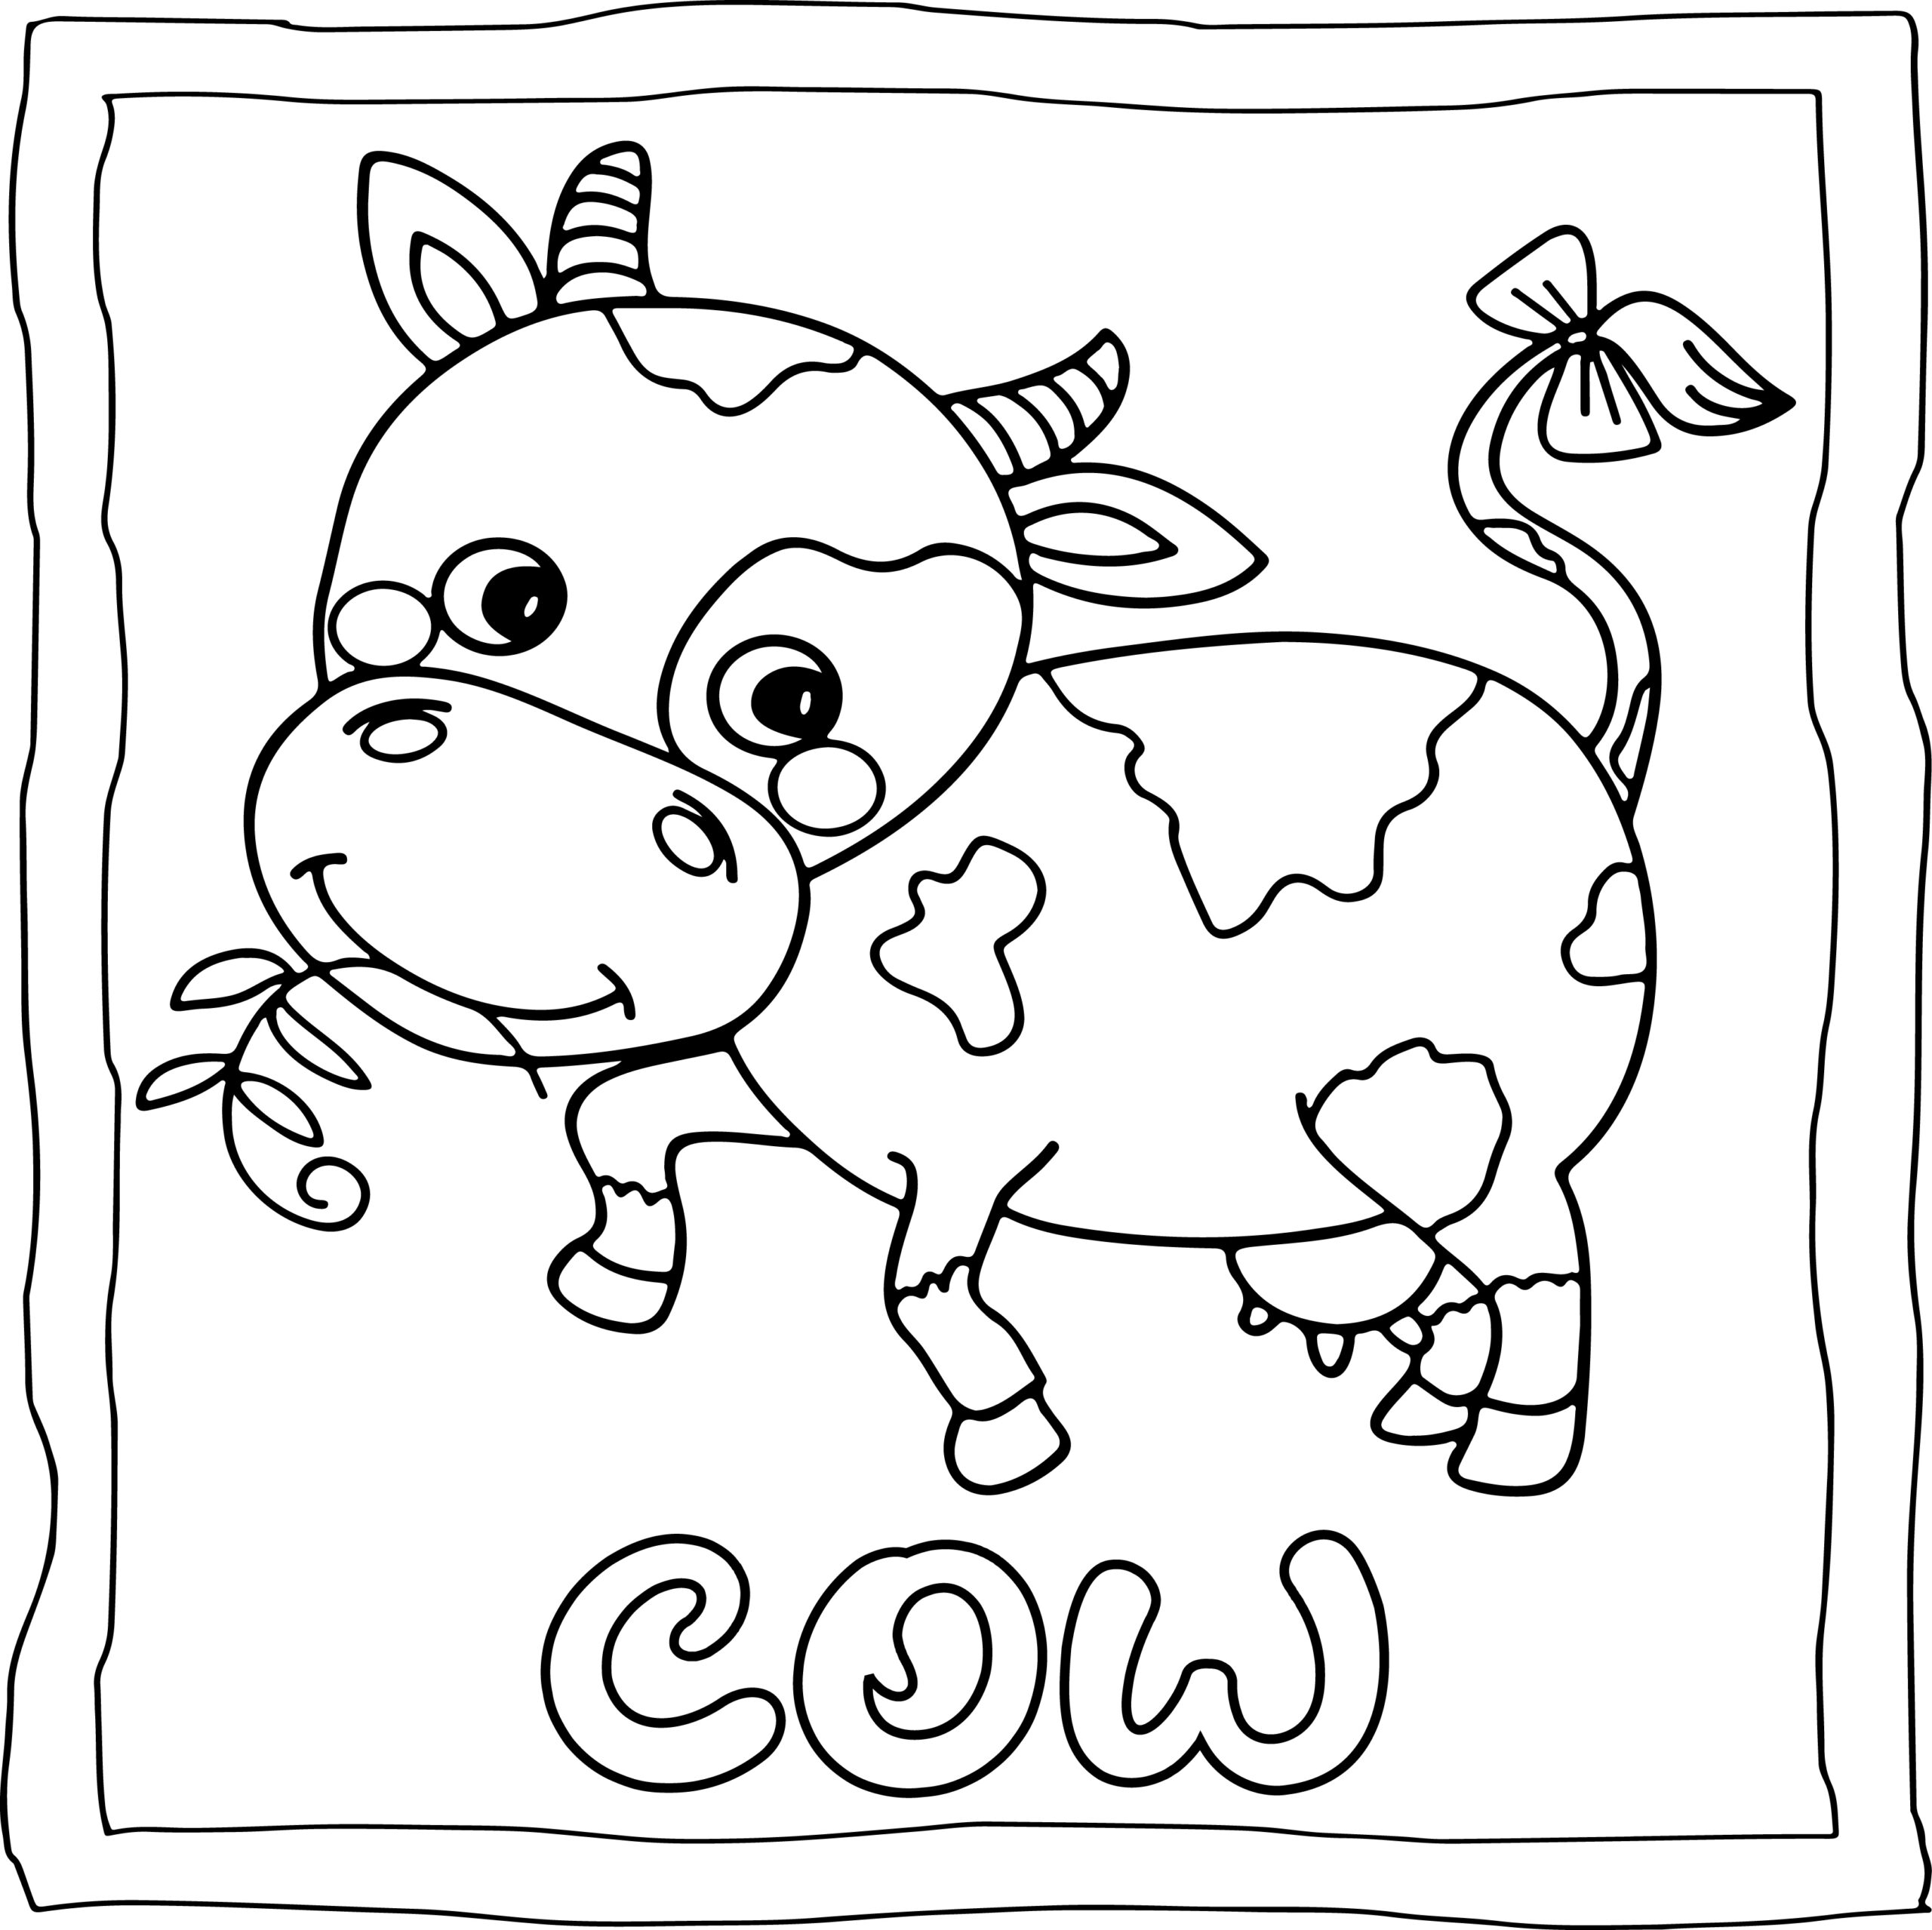 Animal coloring book easy and fun animals coloring pages for kids made by teachers